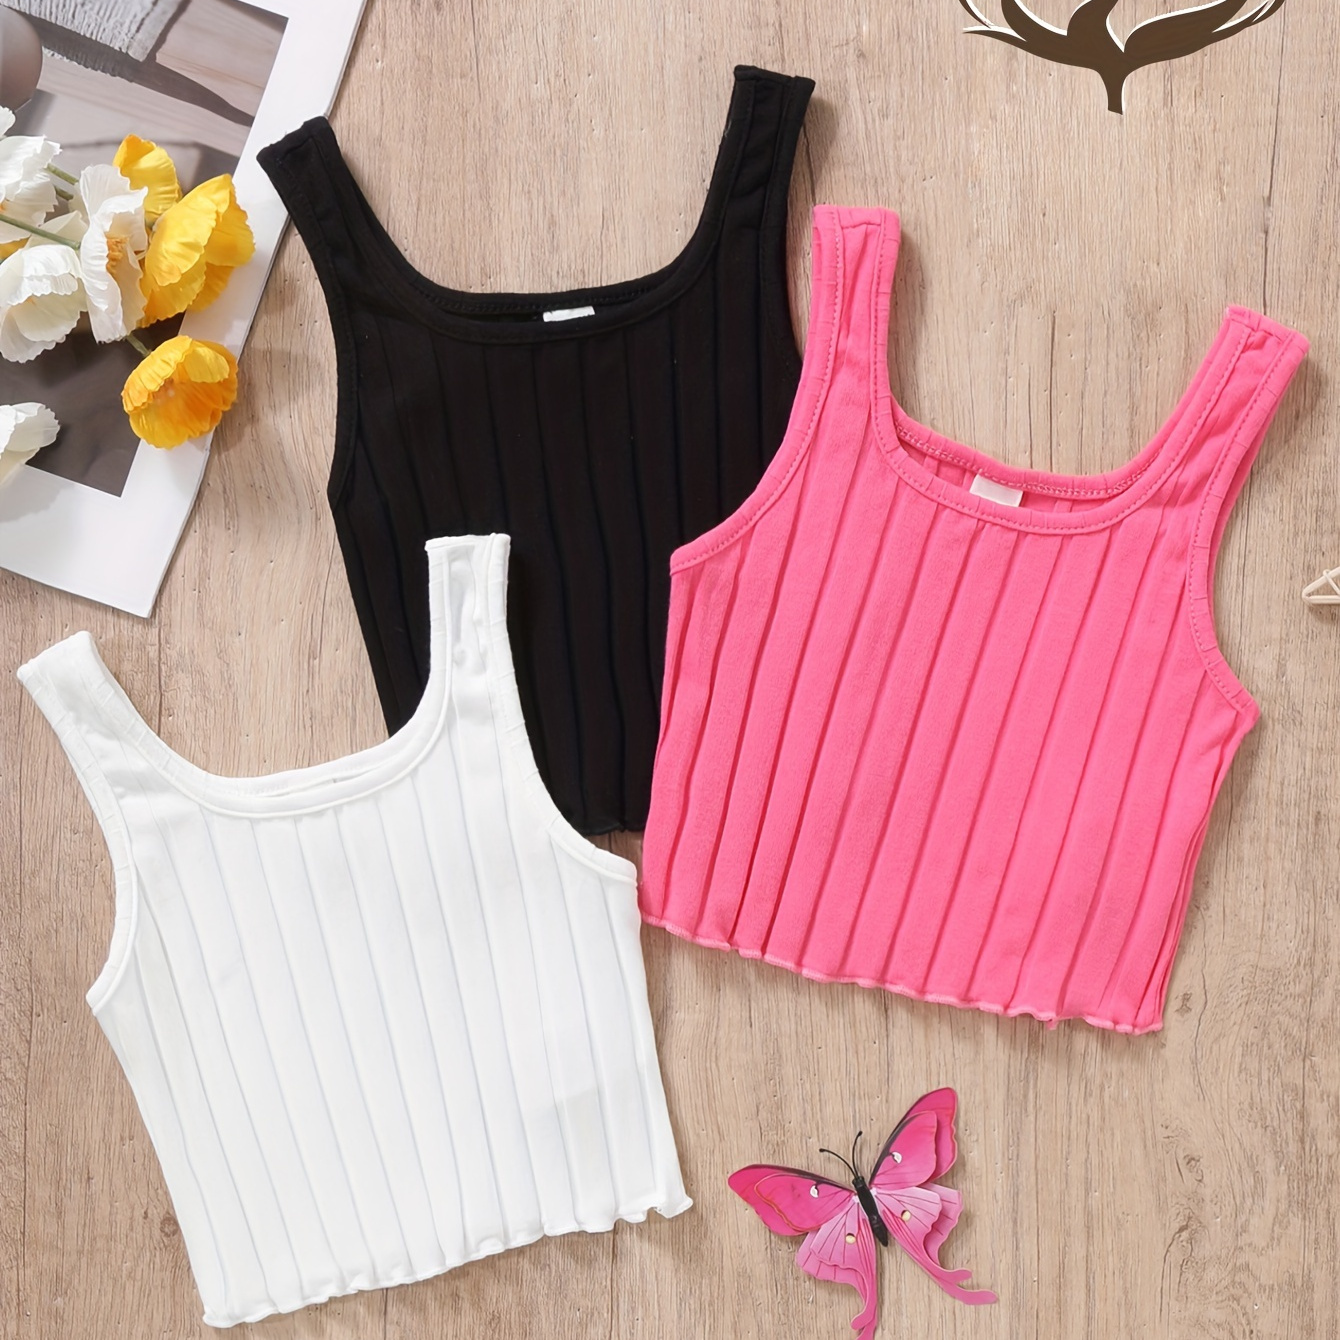 

3pcs Girls Stretchy Solid Color Stripped Activewear Top Set For Sports Outdoor Running Jogging Gift